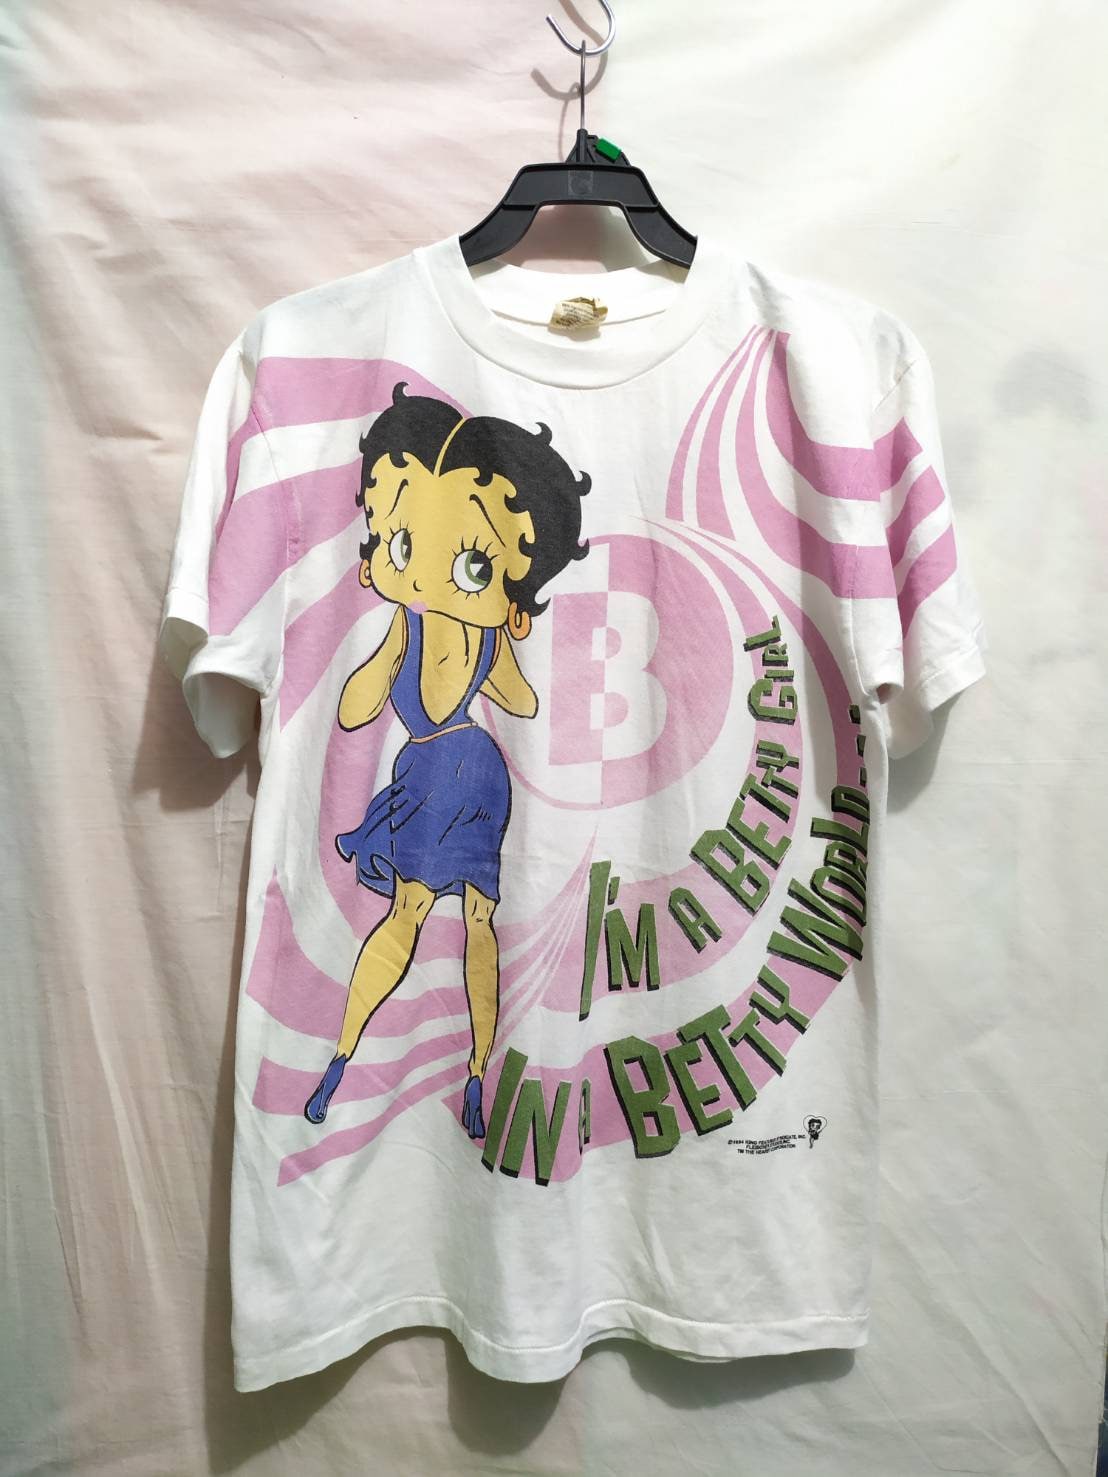 Betty boop t-shirts 90's style wild oats all print | Etsy